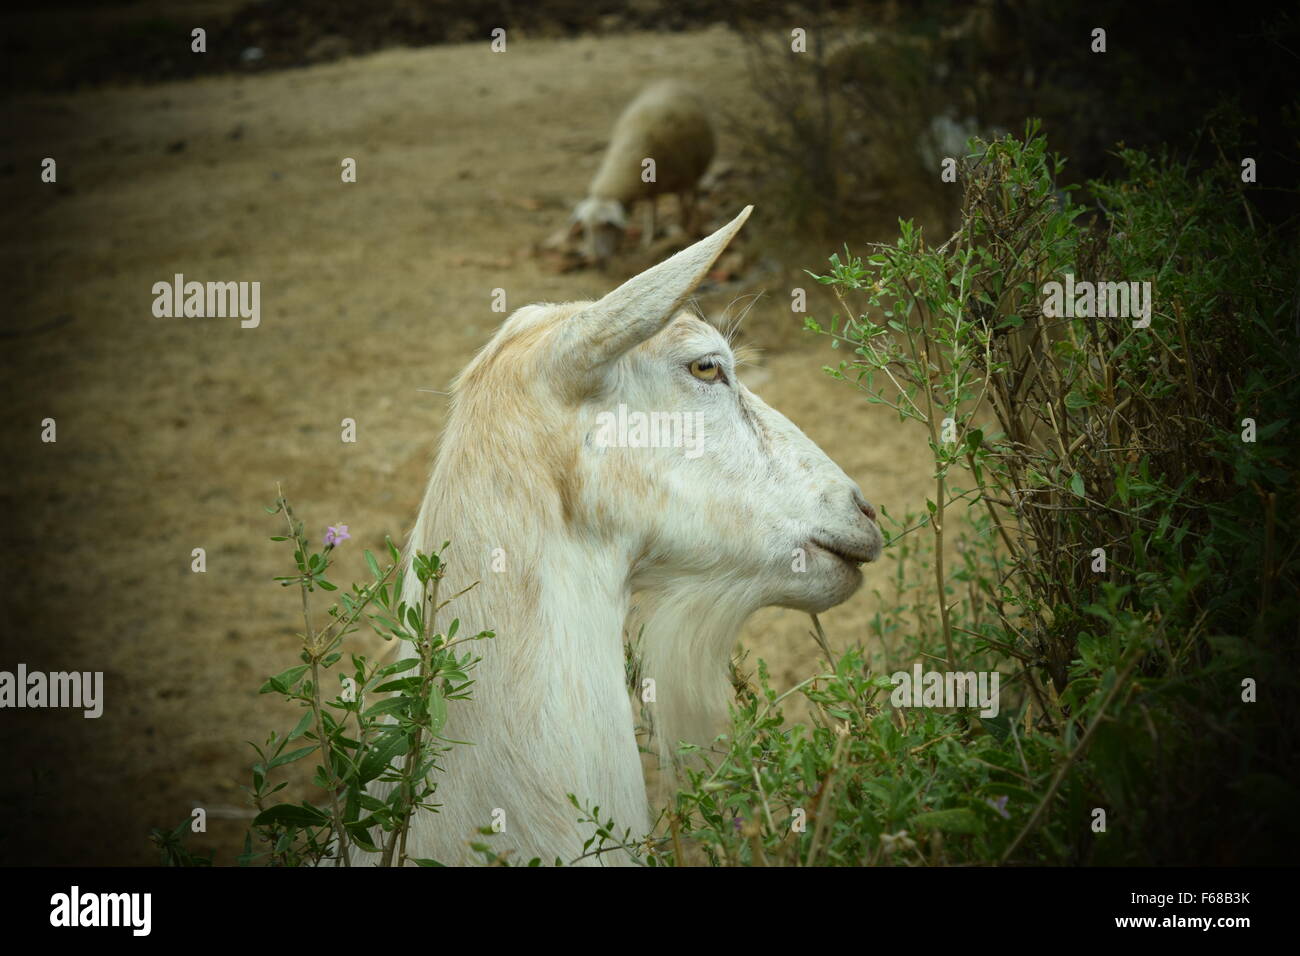 A goat by the bush Stock Photo